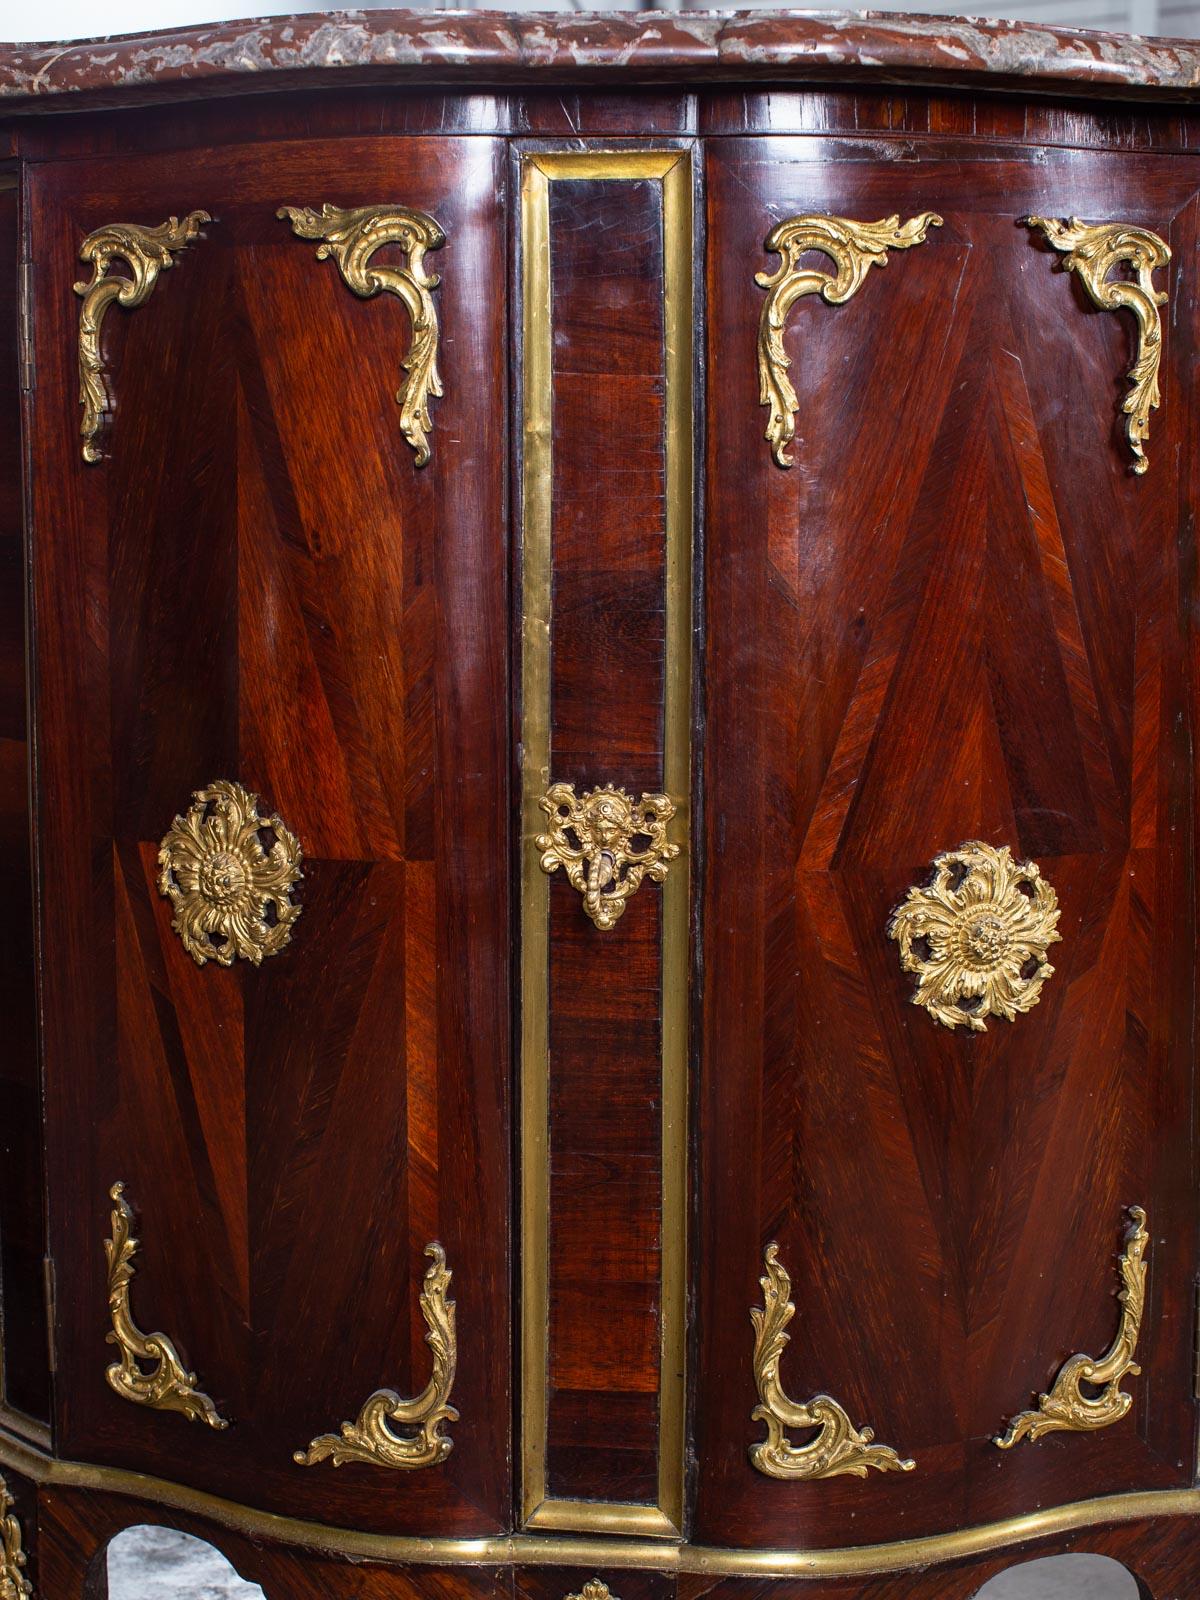 Regency Pair of Antique French Régence Palisander Marble Top Corner Cabinets, circa 1740 For Sale